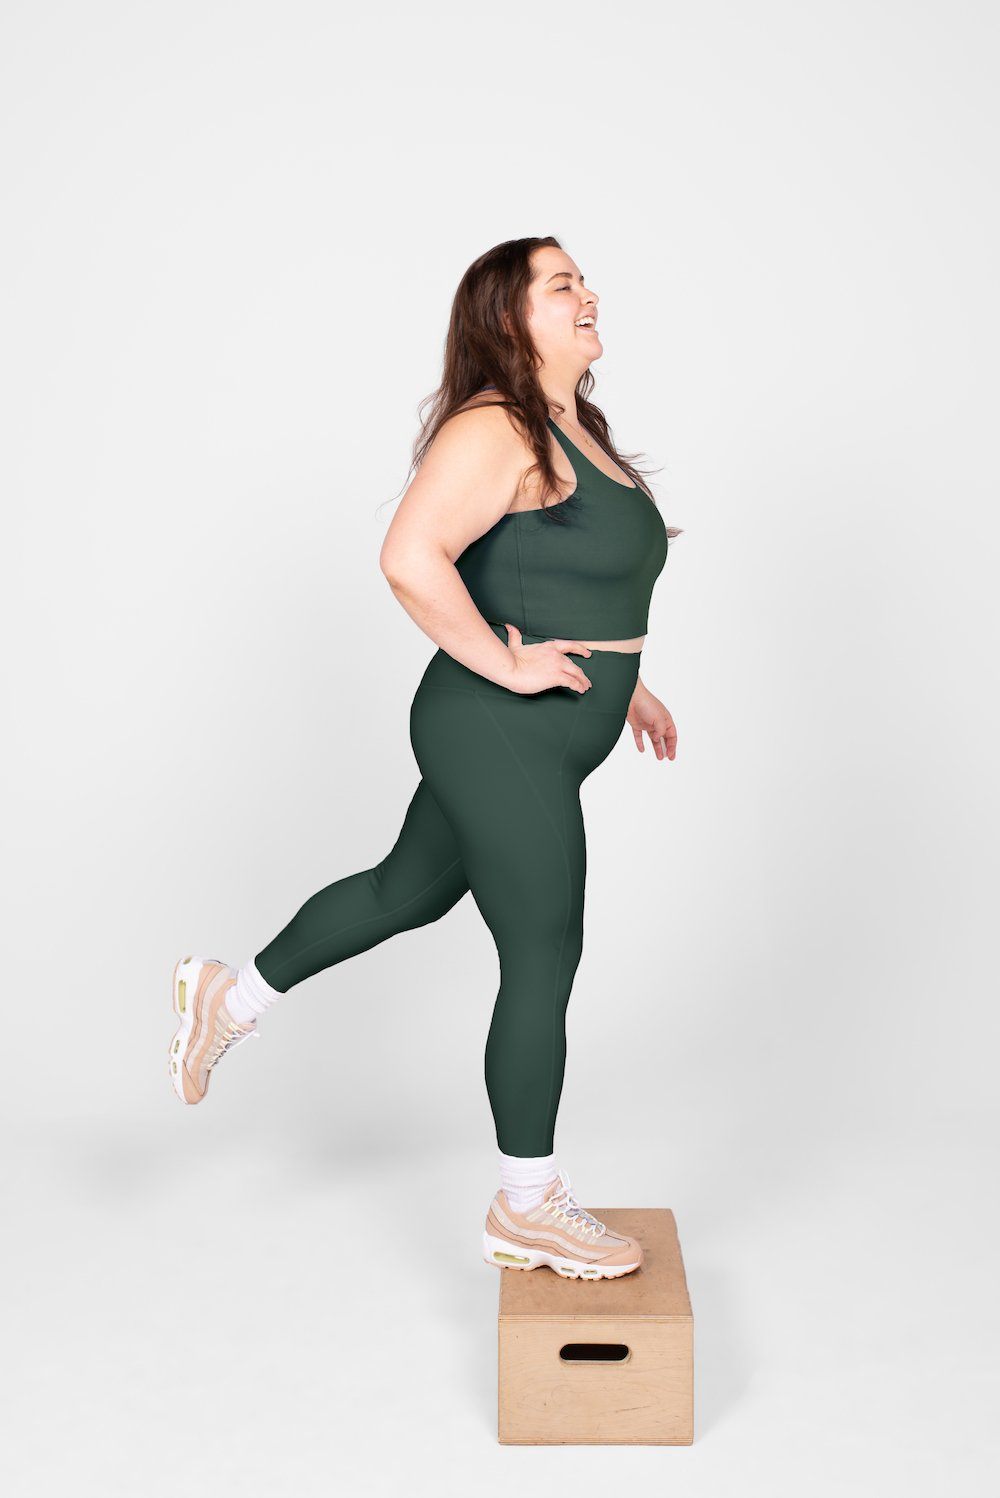 Girlfriend Collective Women's Compressive Legging - 7/8 - Made From  Recycled Plastic Bottles – Weekendbee - premium sportswear